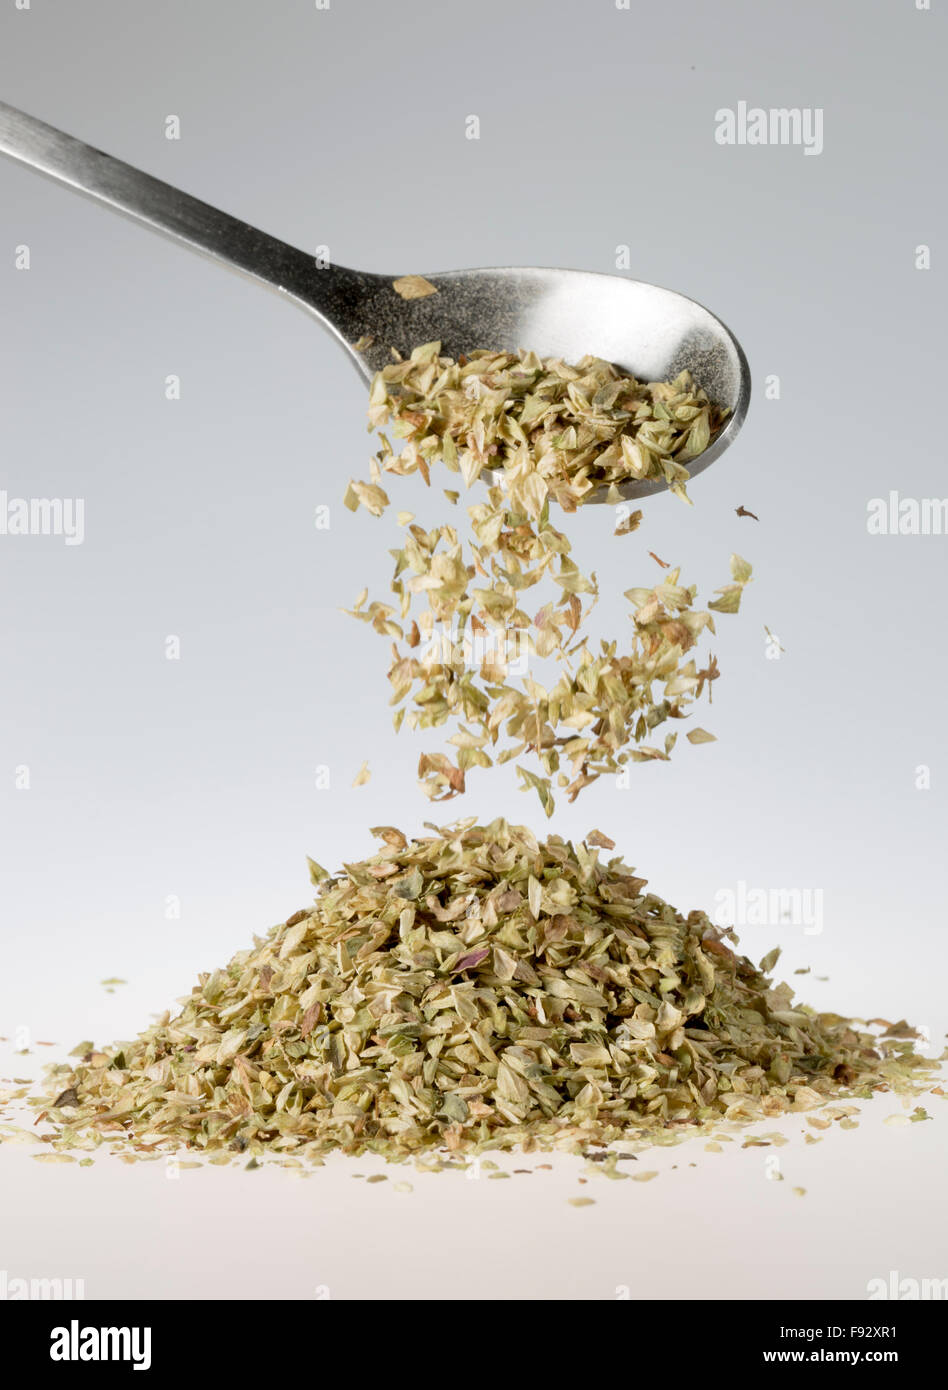 Dried Oregano Falling from Tablespoon Stock Photo